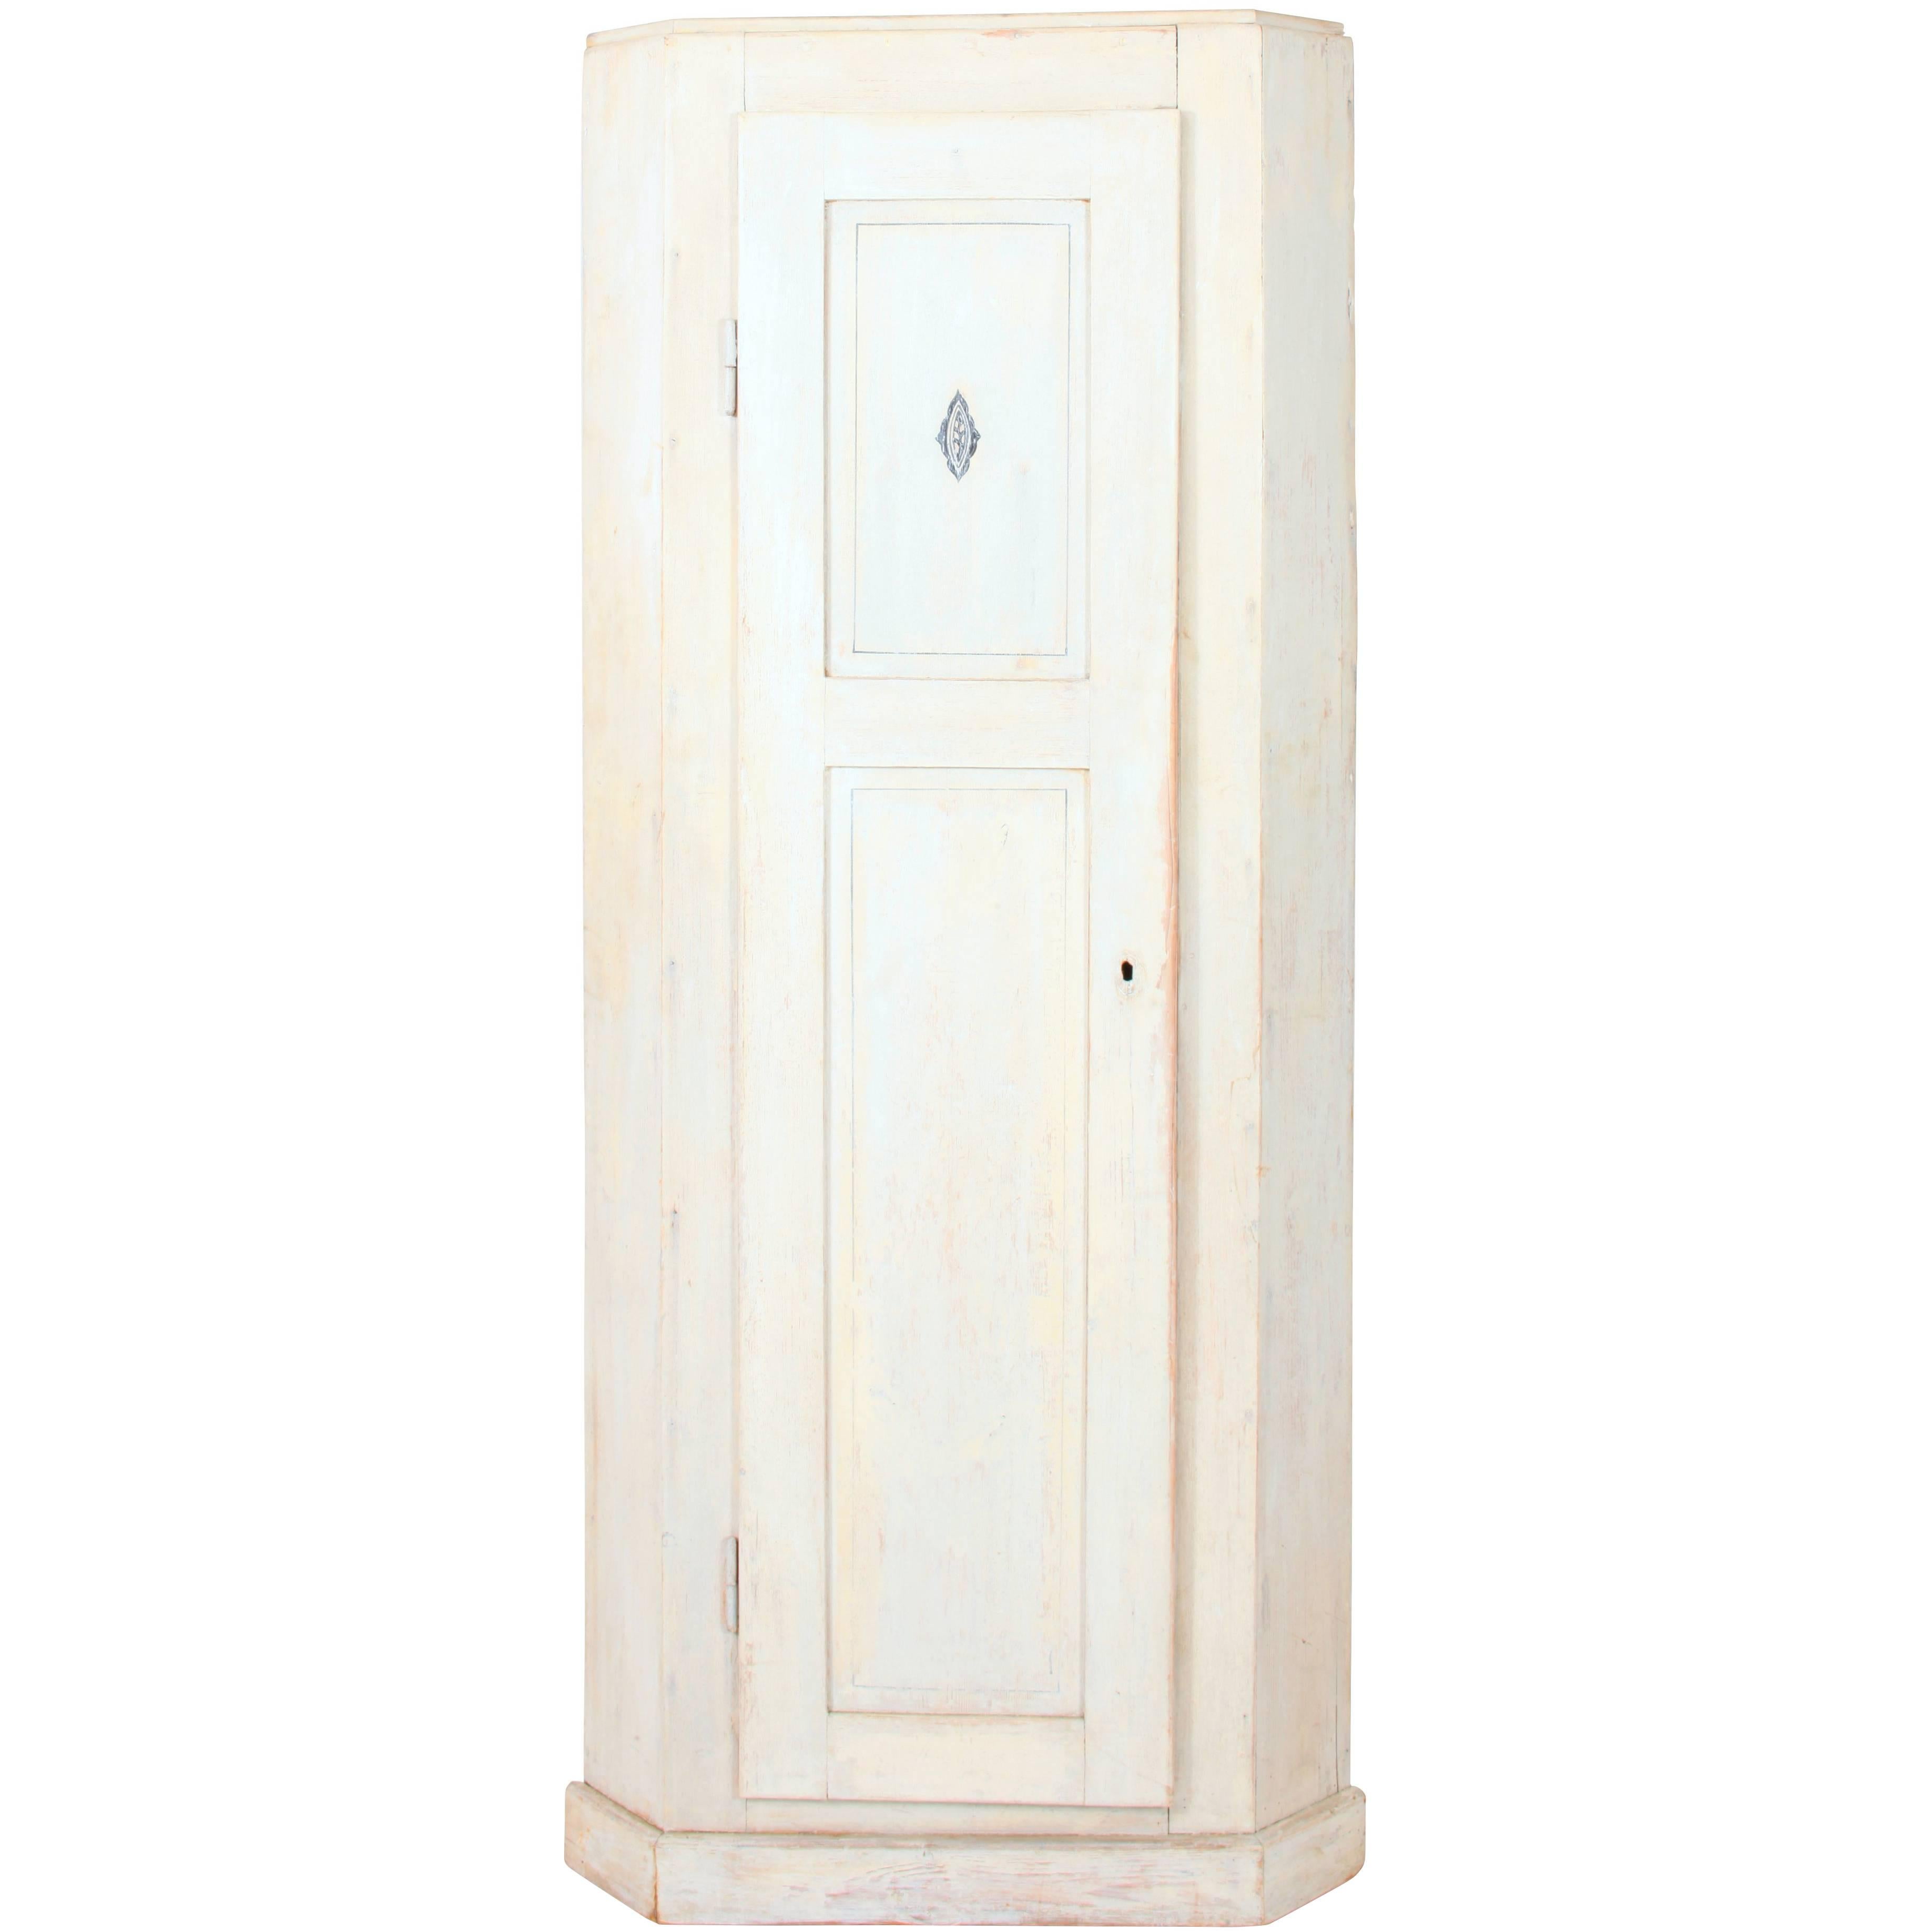 The Swedish corner cupboard, painted pine in grey/white, has a full length paneled door with a blue painted emblem, plank backing, a single shelf at the top inside and molding for holding a second shelf. The inside is unpainted.

Distance from